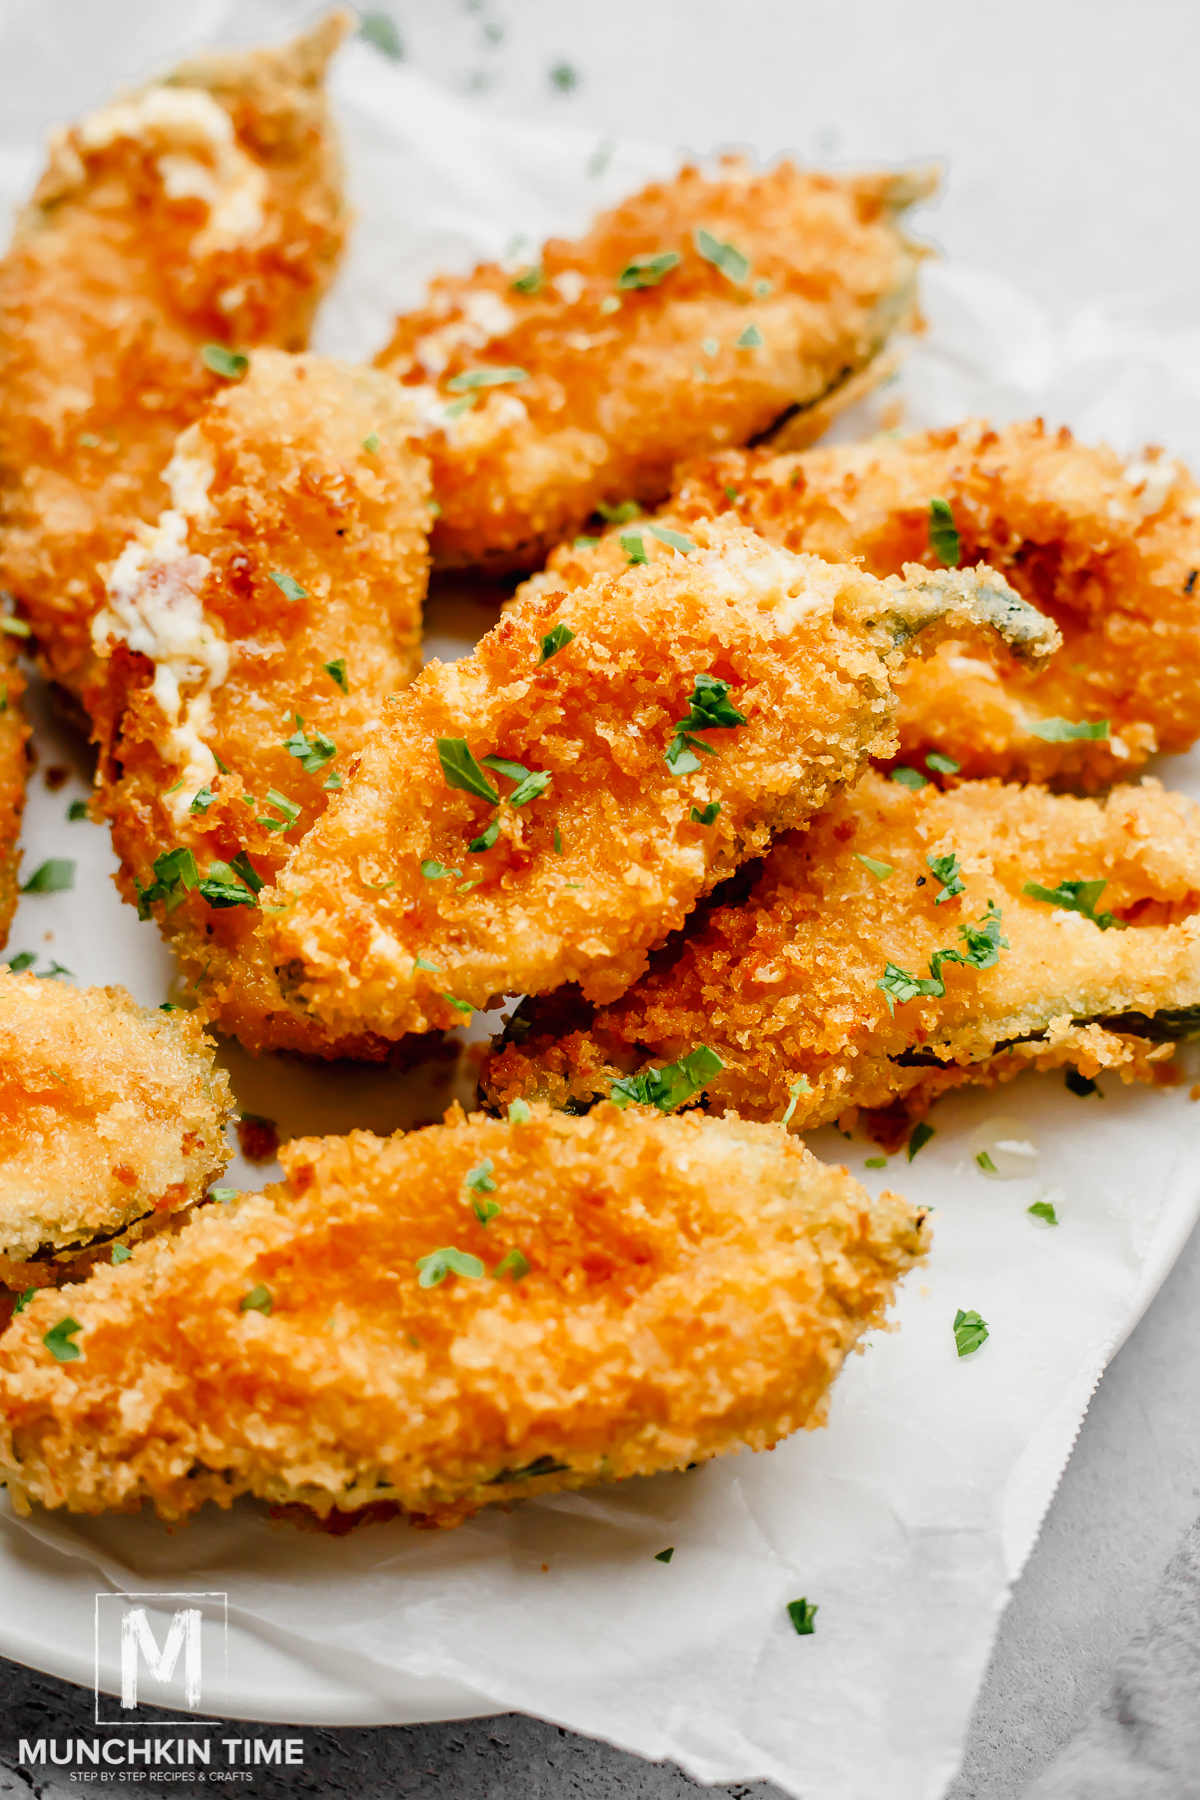 Can to Make Jalapeno Poppers in an Air Fryer